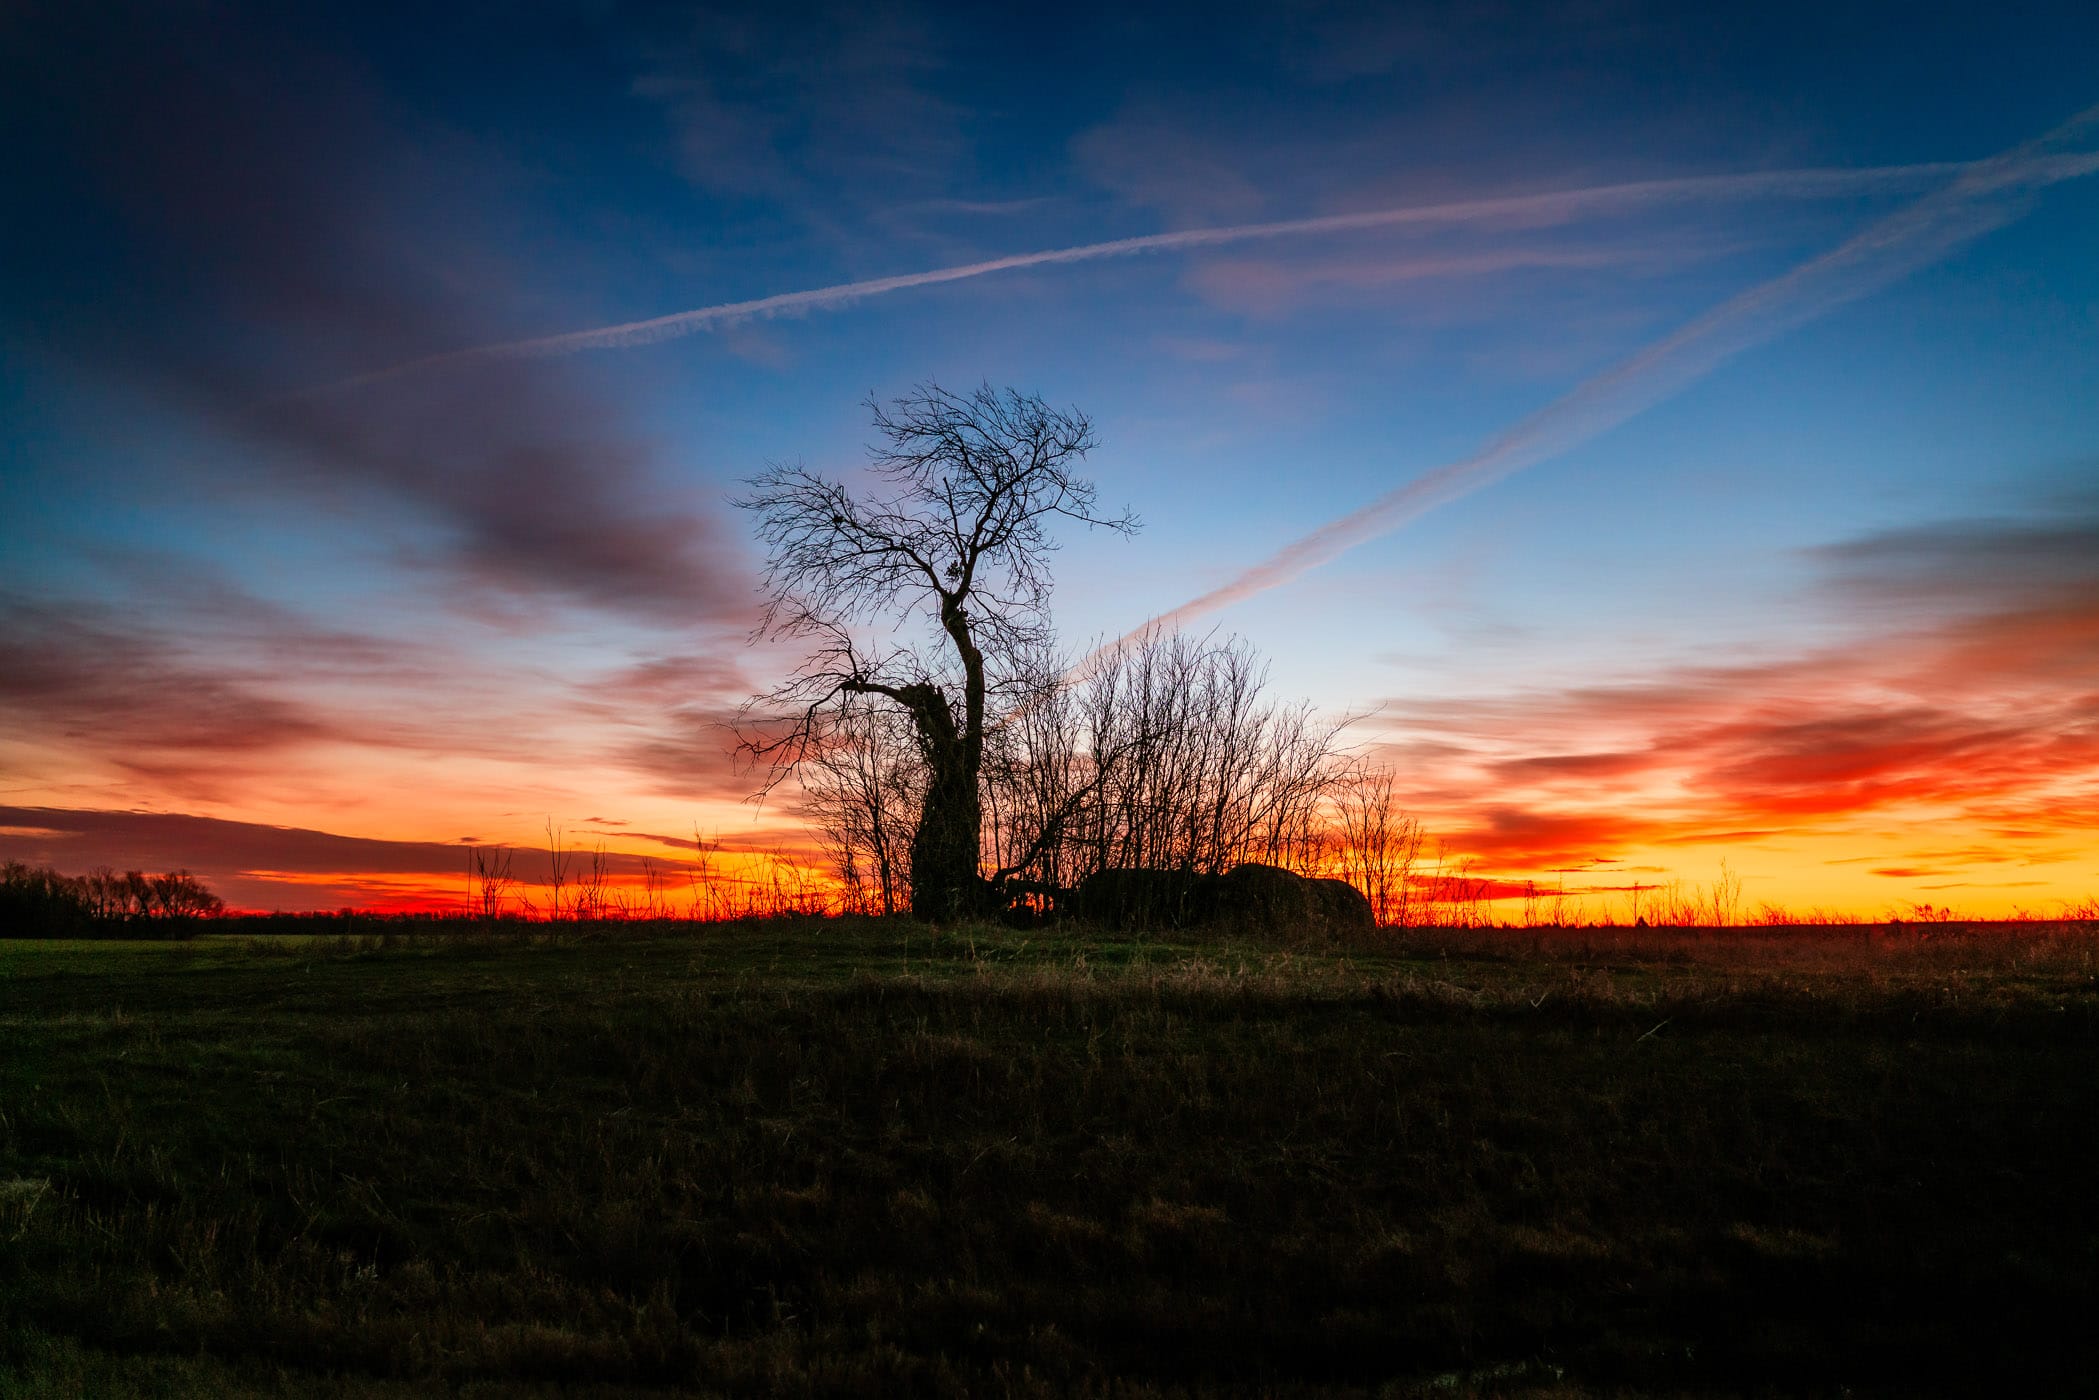 The sun rises on a tree and nearby bales of hay near Dorchester, Texas.